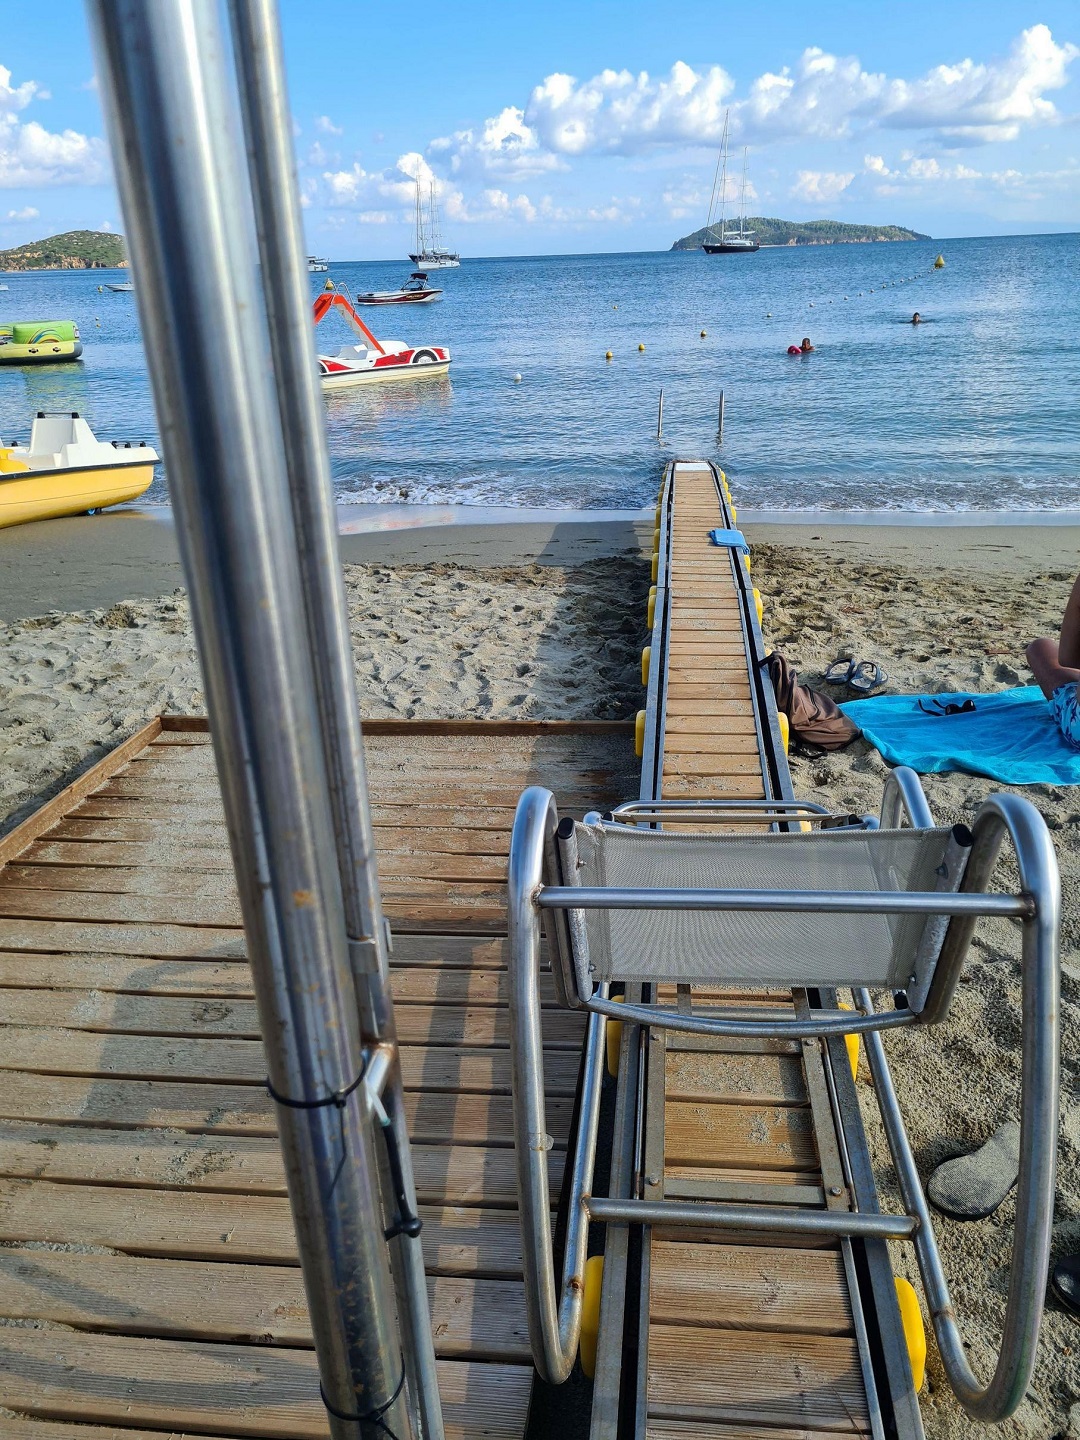 A Sliding Chair To Help Disabled People Into The Sea